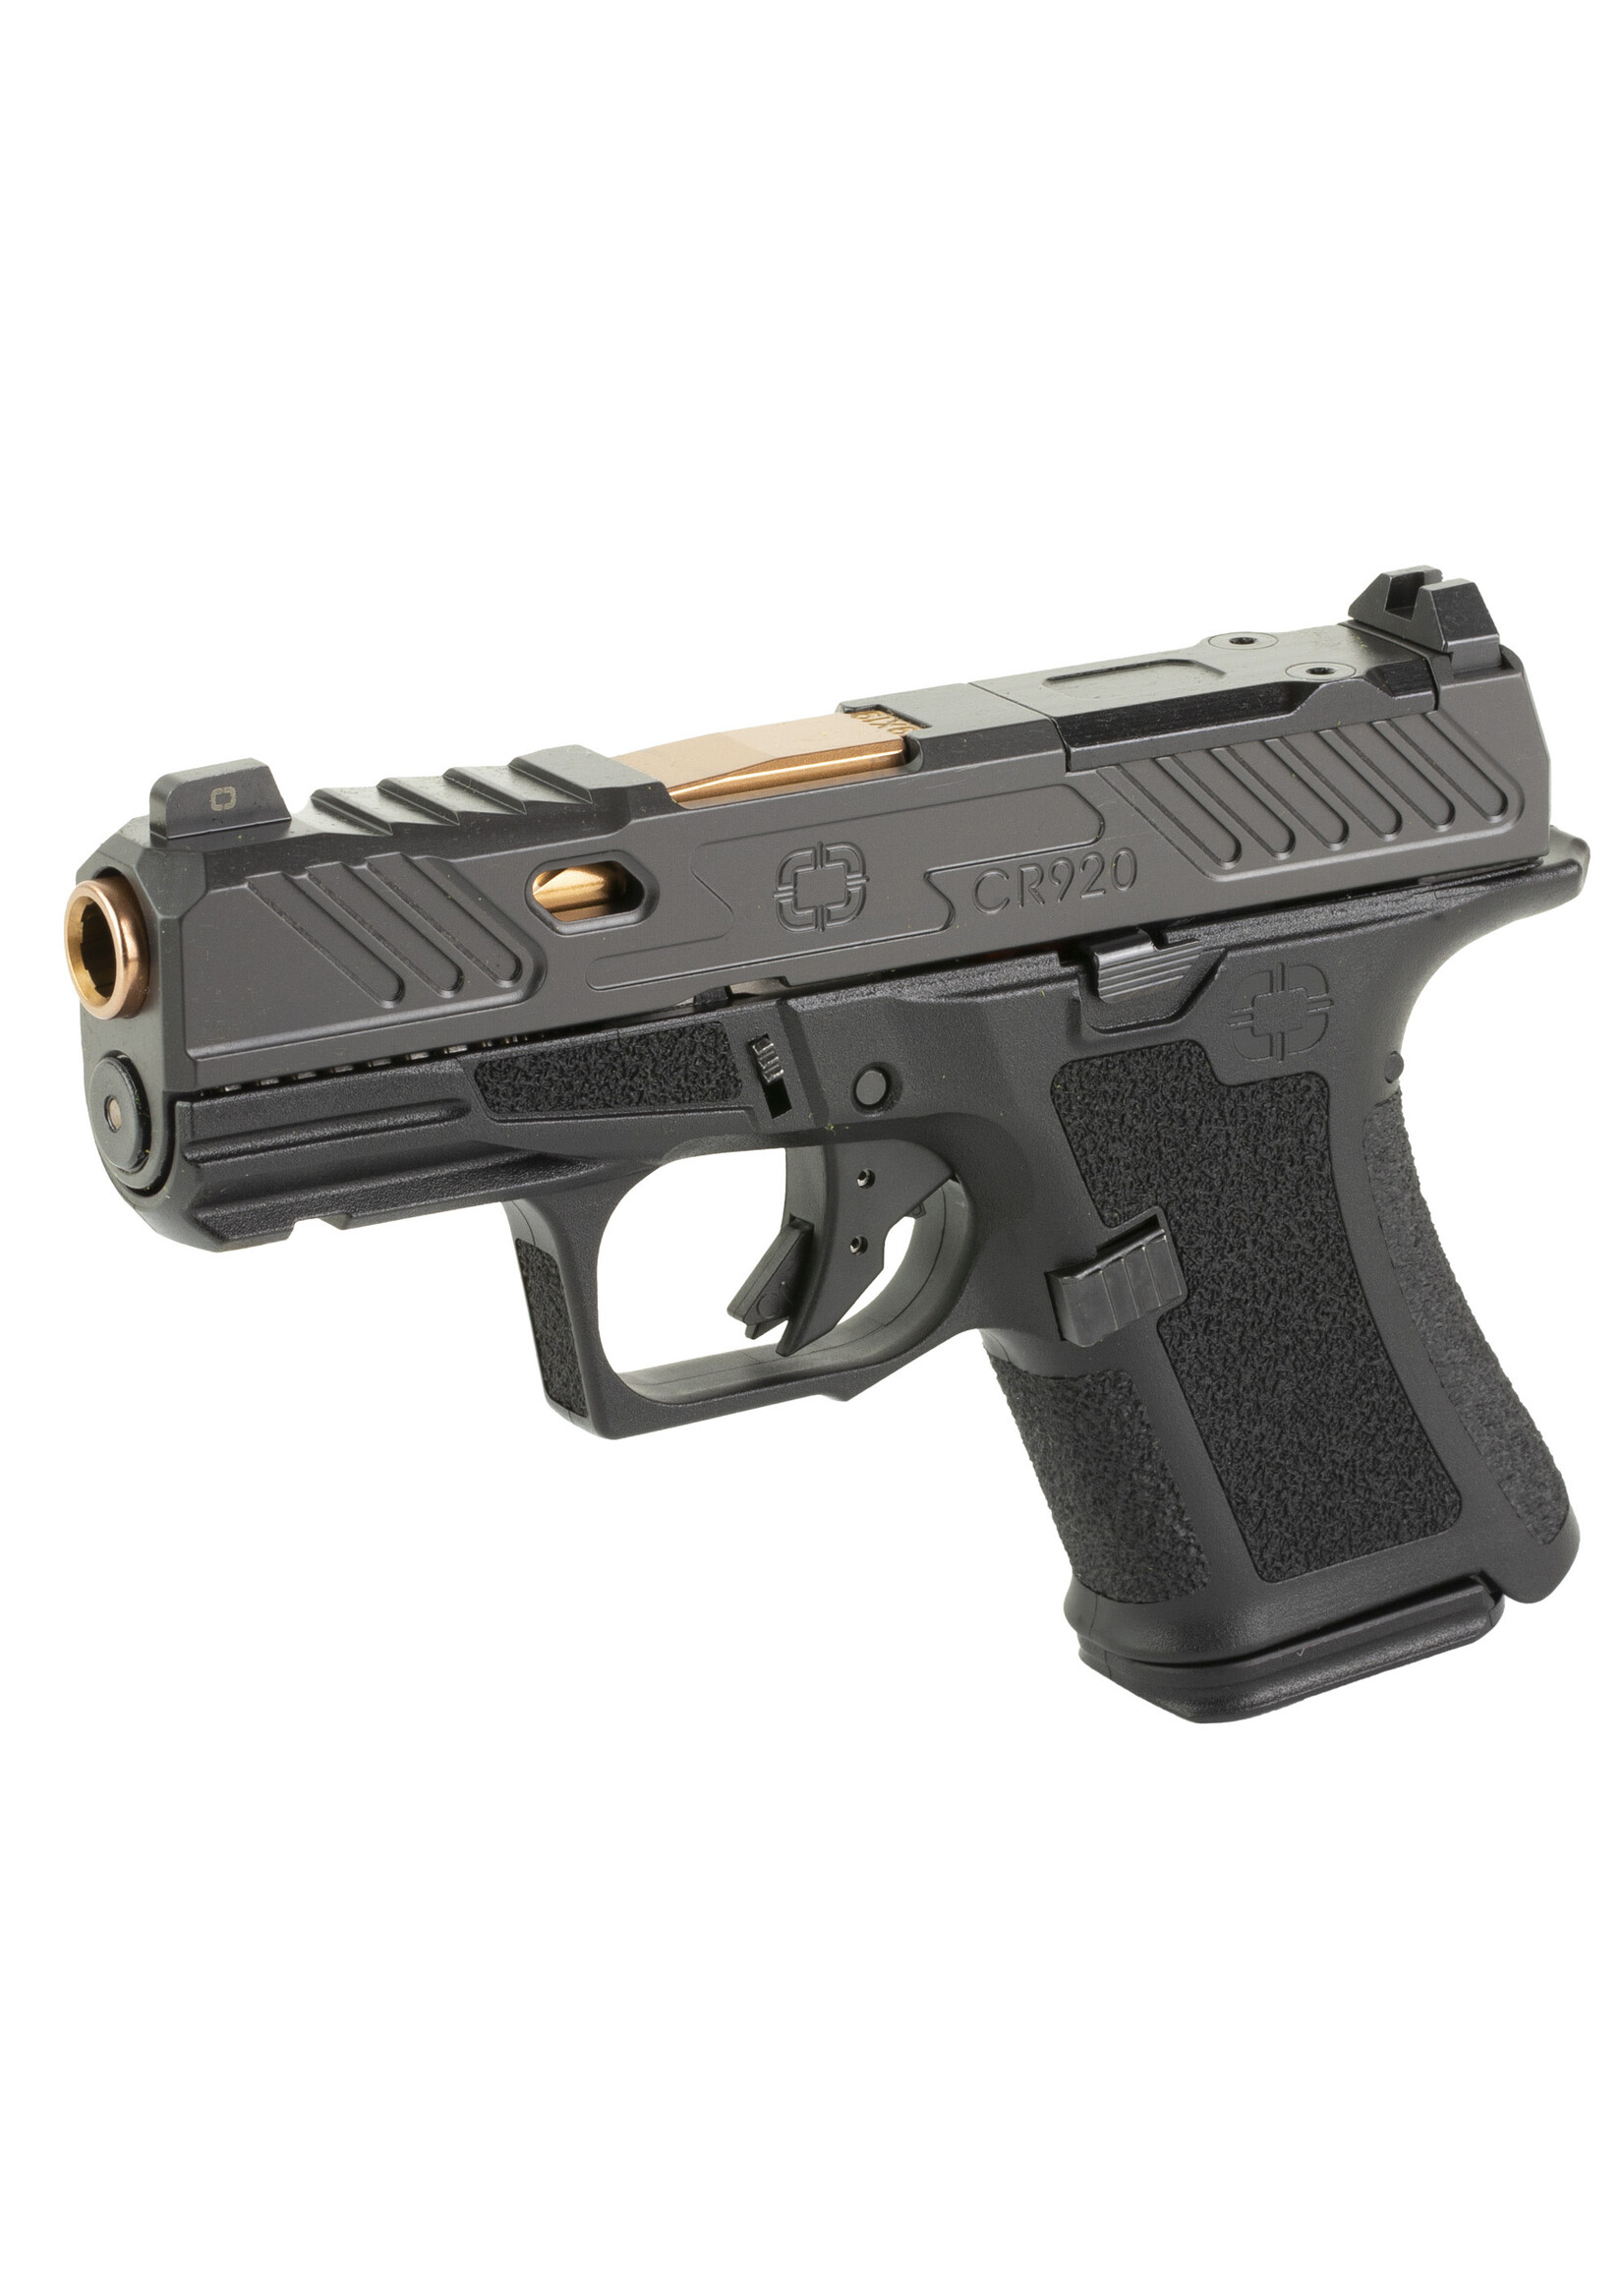 Shadow Systems Shadow Systems, CR920 Elite, Striker Fired, Semi-automatic Pistol, Sub-Compact, 9mm, 3.4" Bronze Spiral Fluted Barrel, Polymer Frame, Nitride Finish, Black, Front Night Sight, Trigger Safety, (1) - 10 Round (1) - 13 Round, Optics Ready, Includes 2 Ma